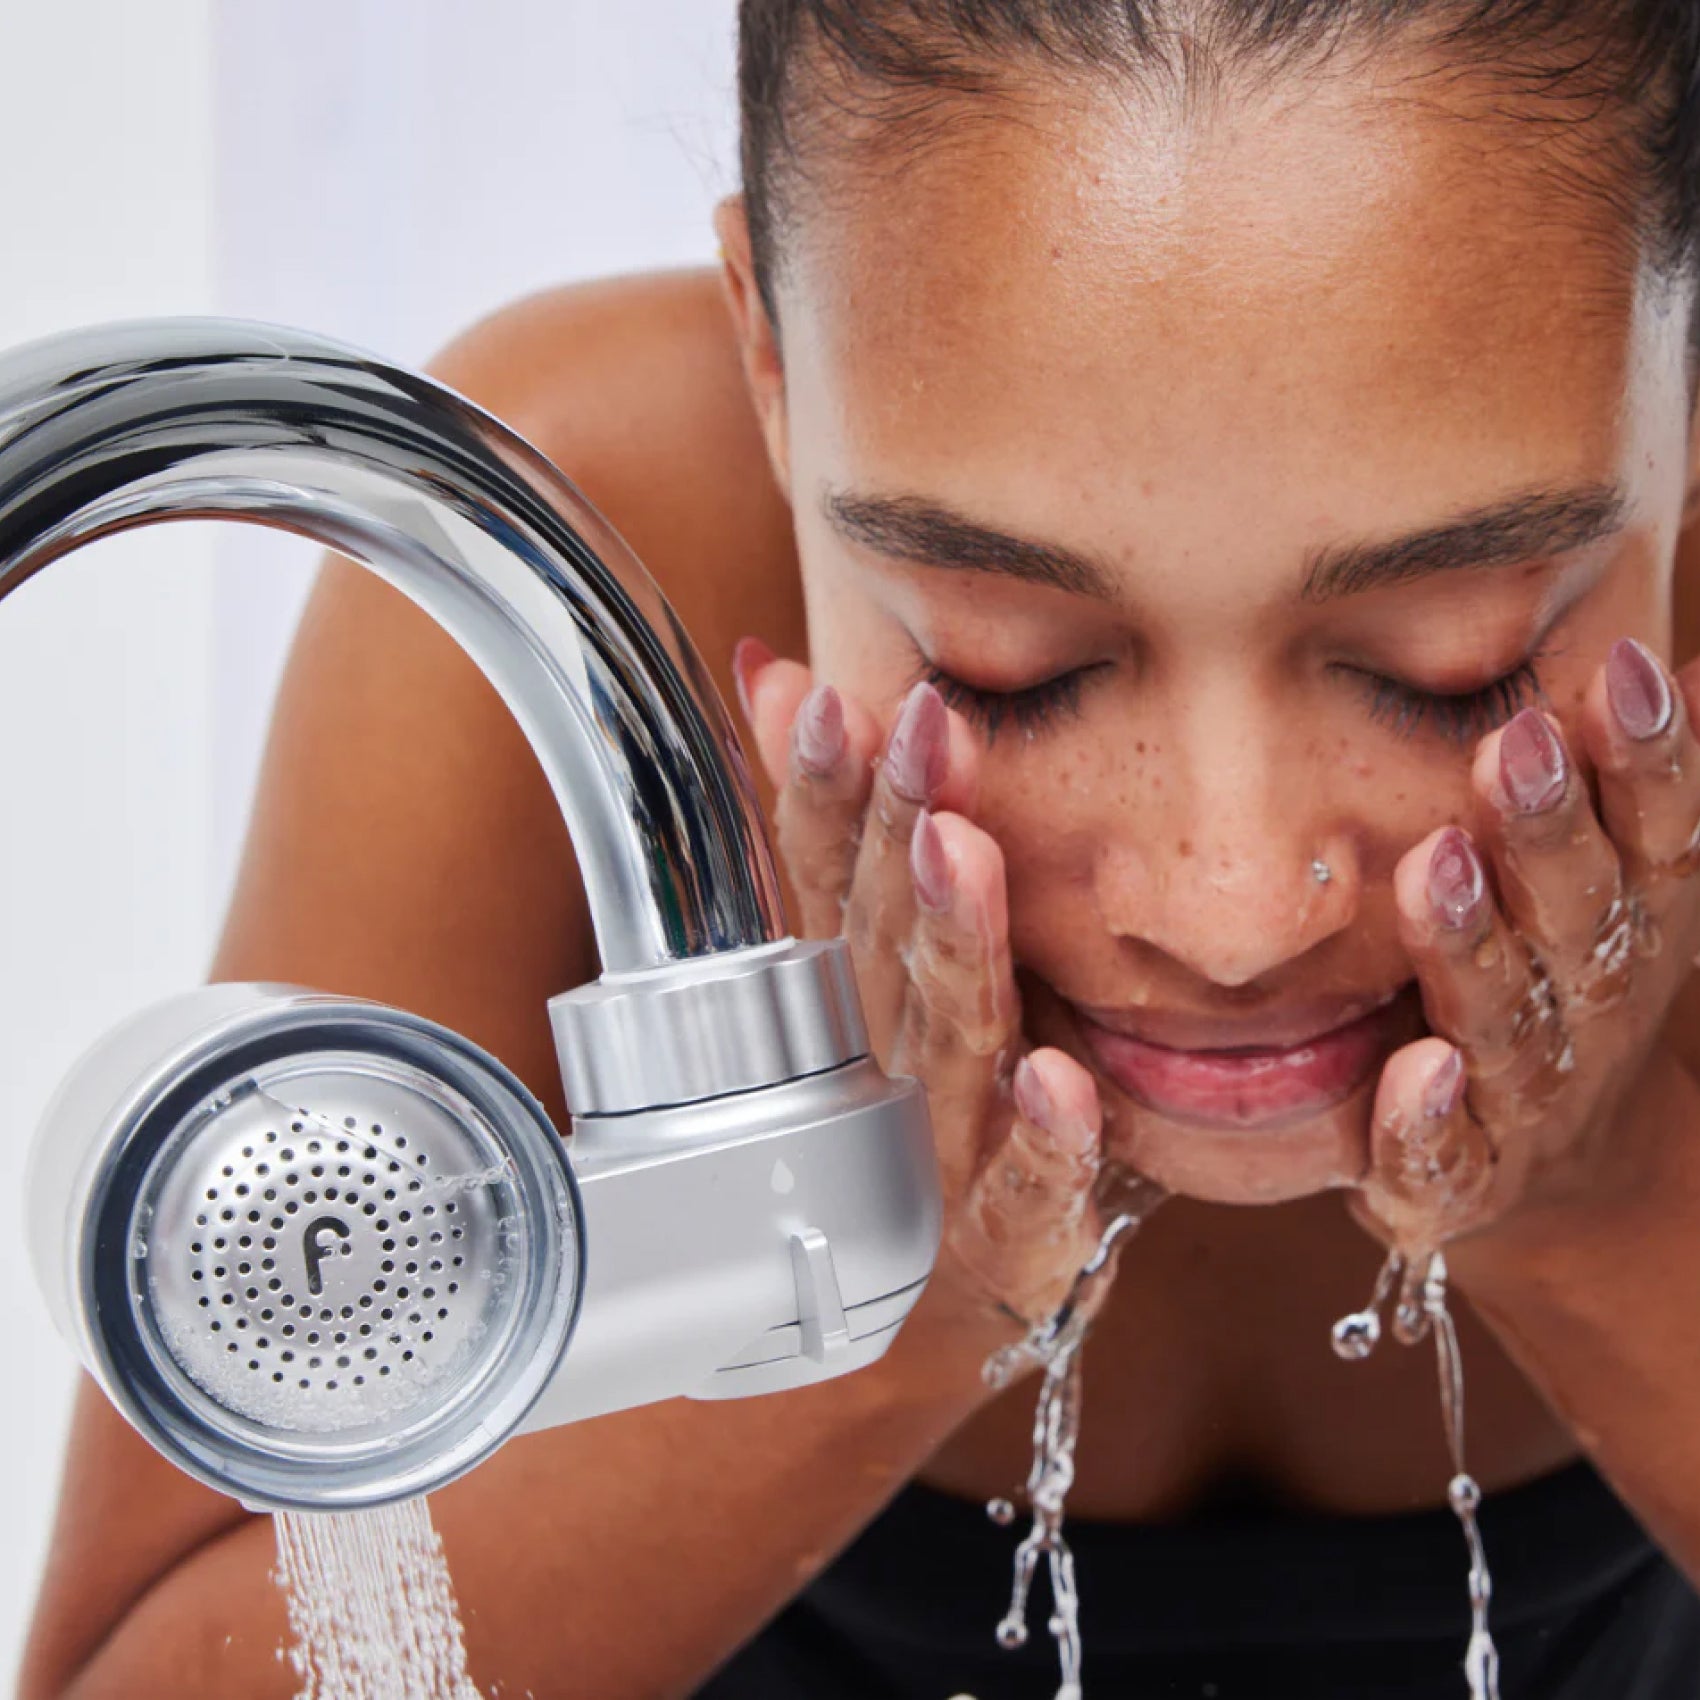 Woman washing face under a running faucet.